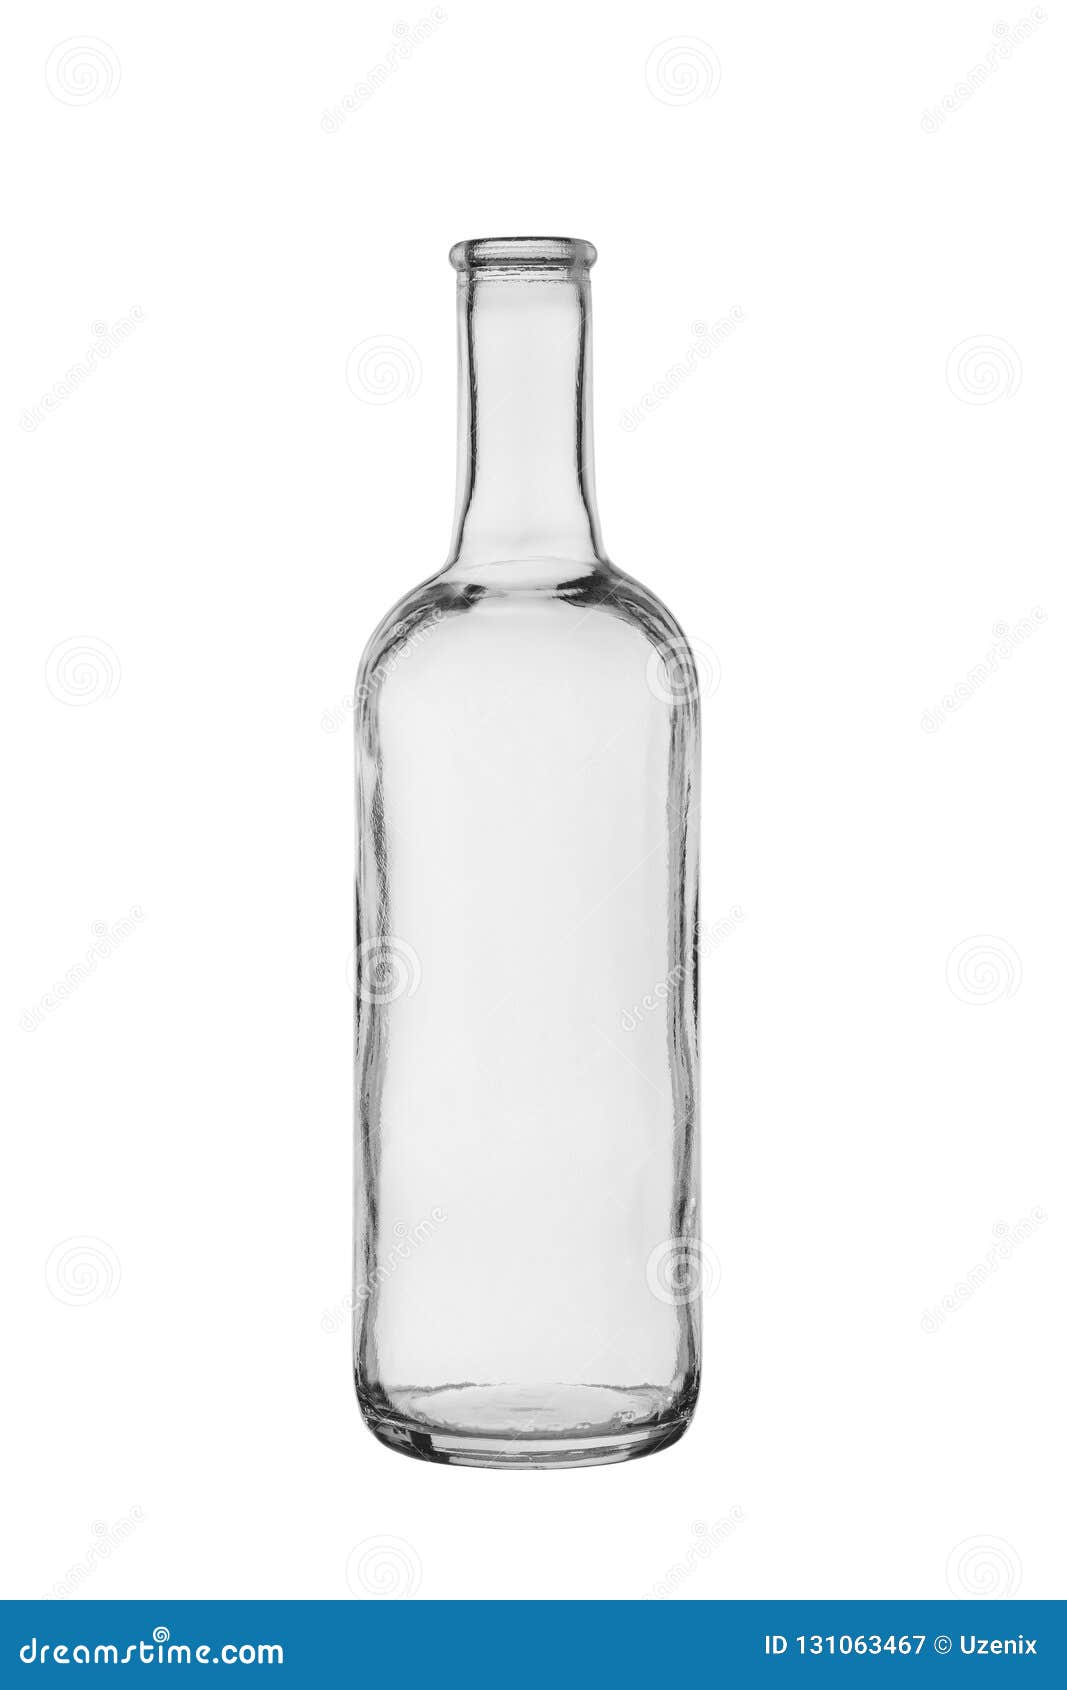 empty bottle with a narrow neck from transparent, colourless glass on a white background